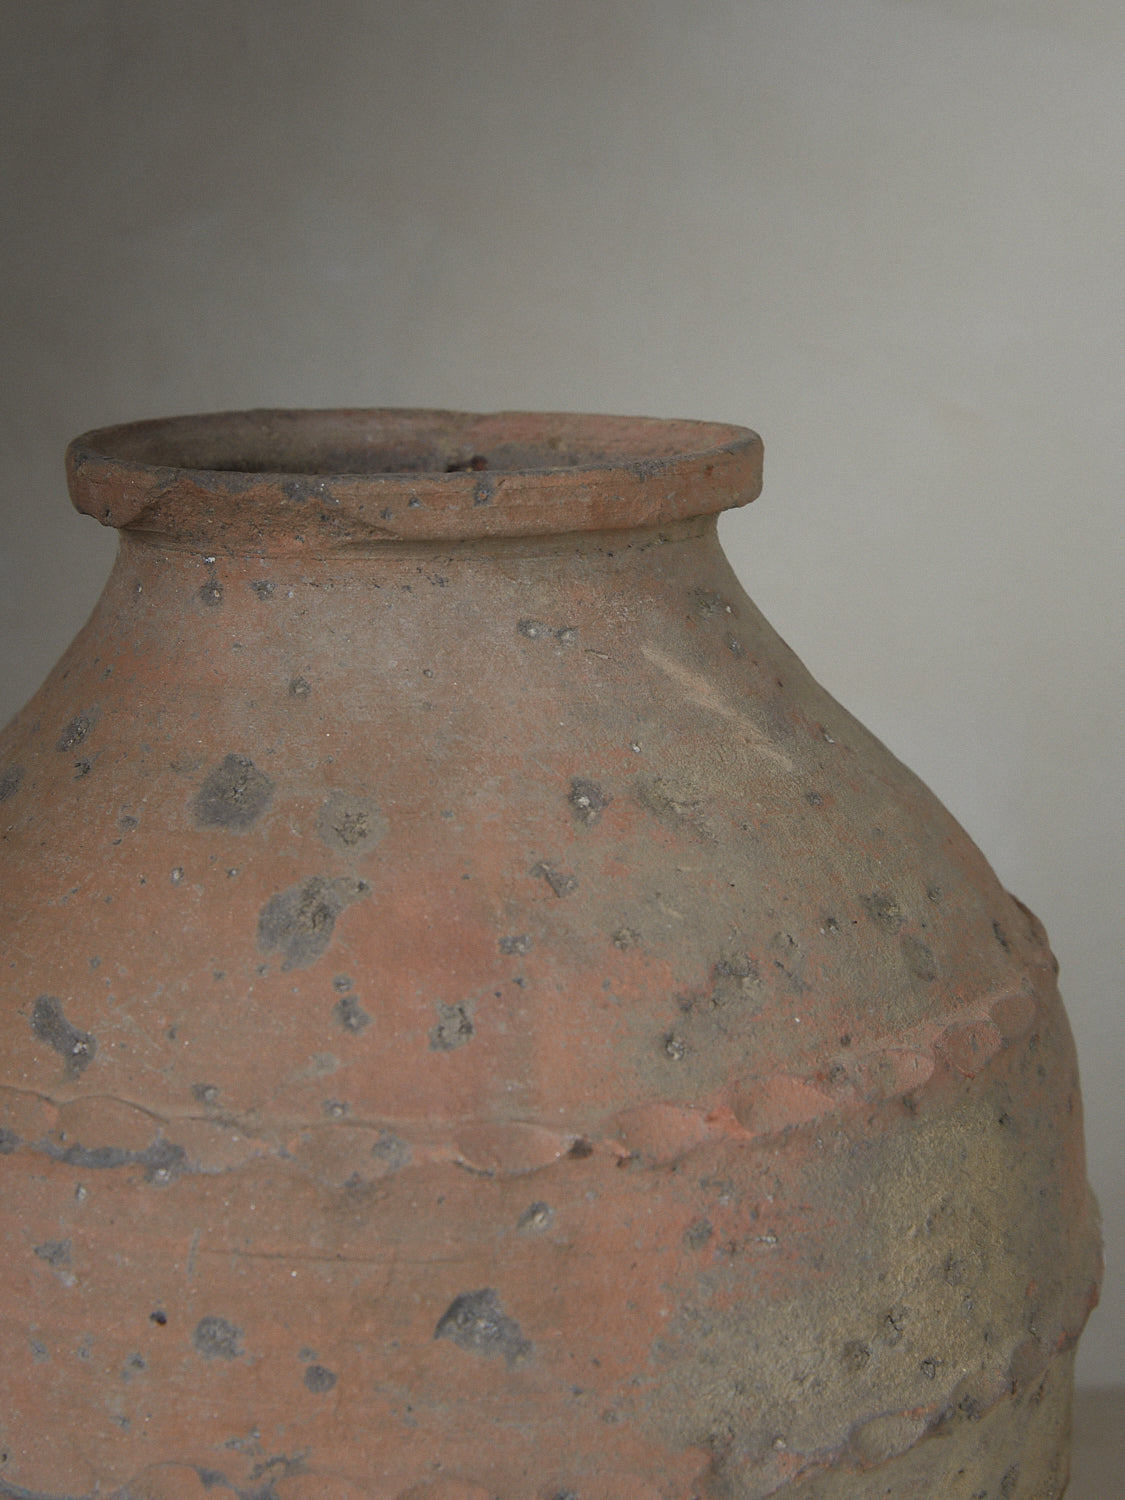 Authentic terracotta vintage vessel originally purposed for storing olive oil with banded braiding details throughout. 